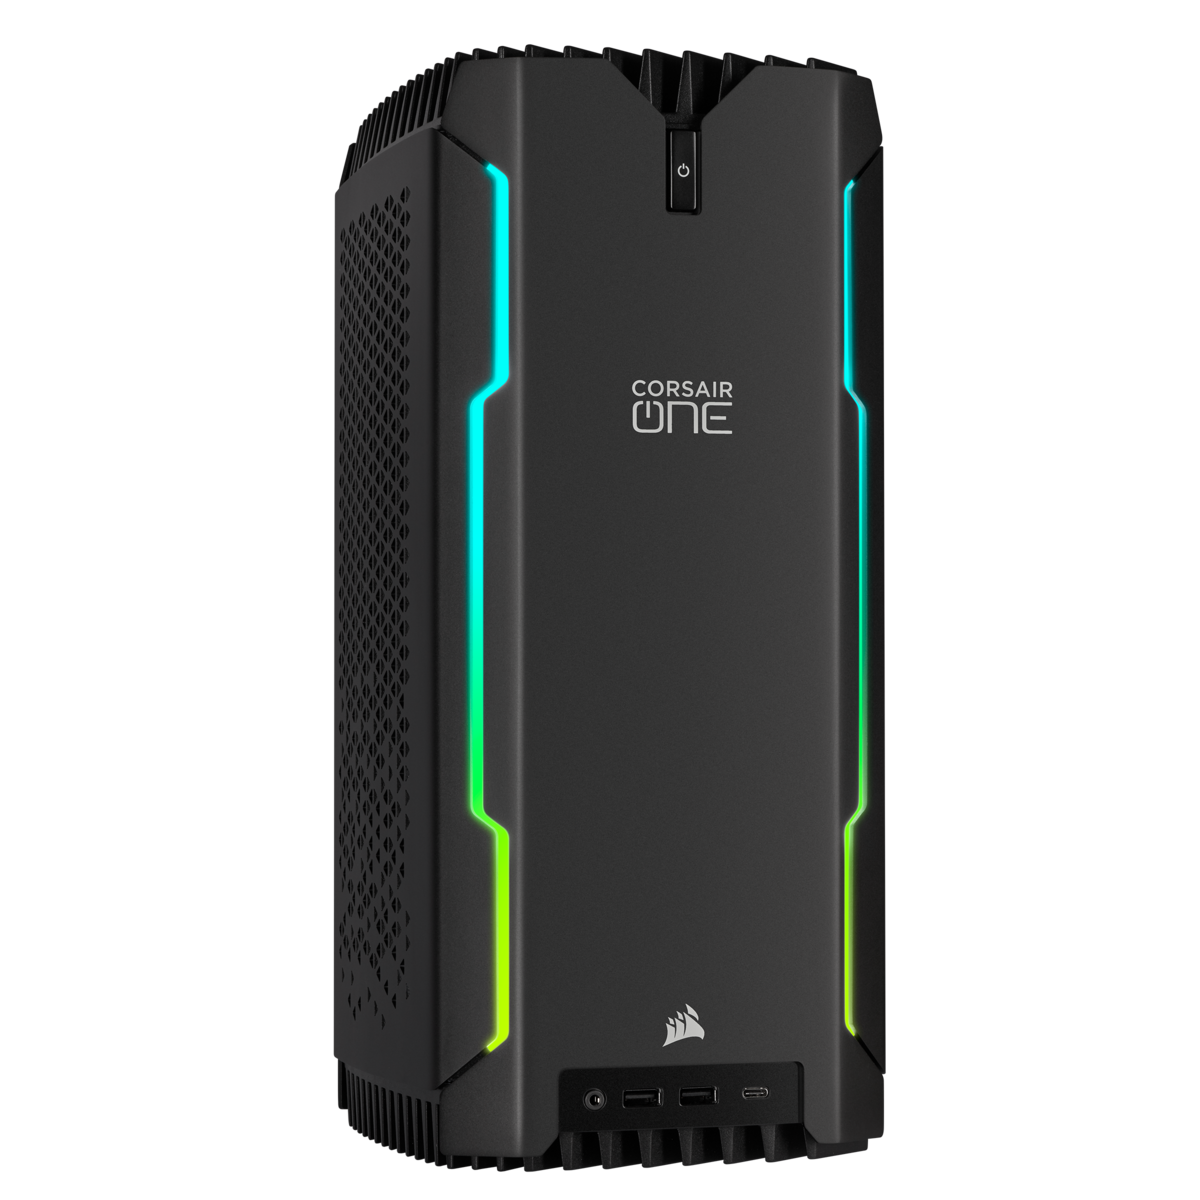 CS-9020021-NA-Gallery-CORSAIR-ONE-a200-01.png_1200Wx1200H.png